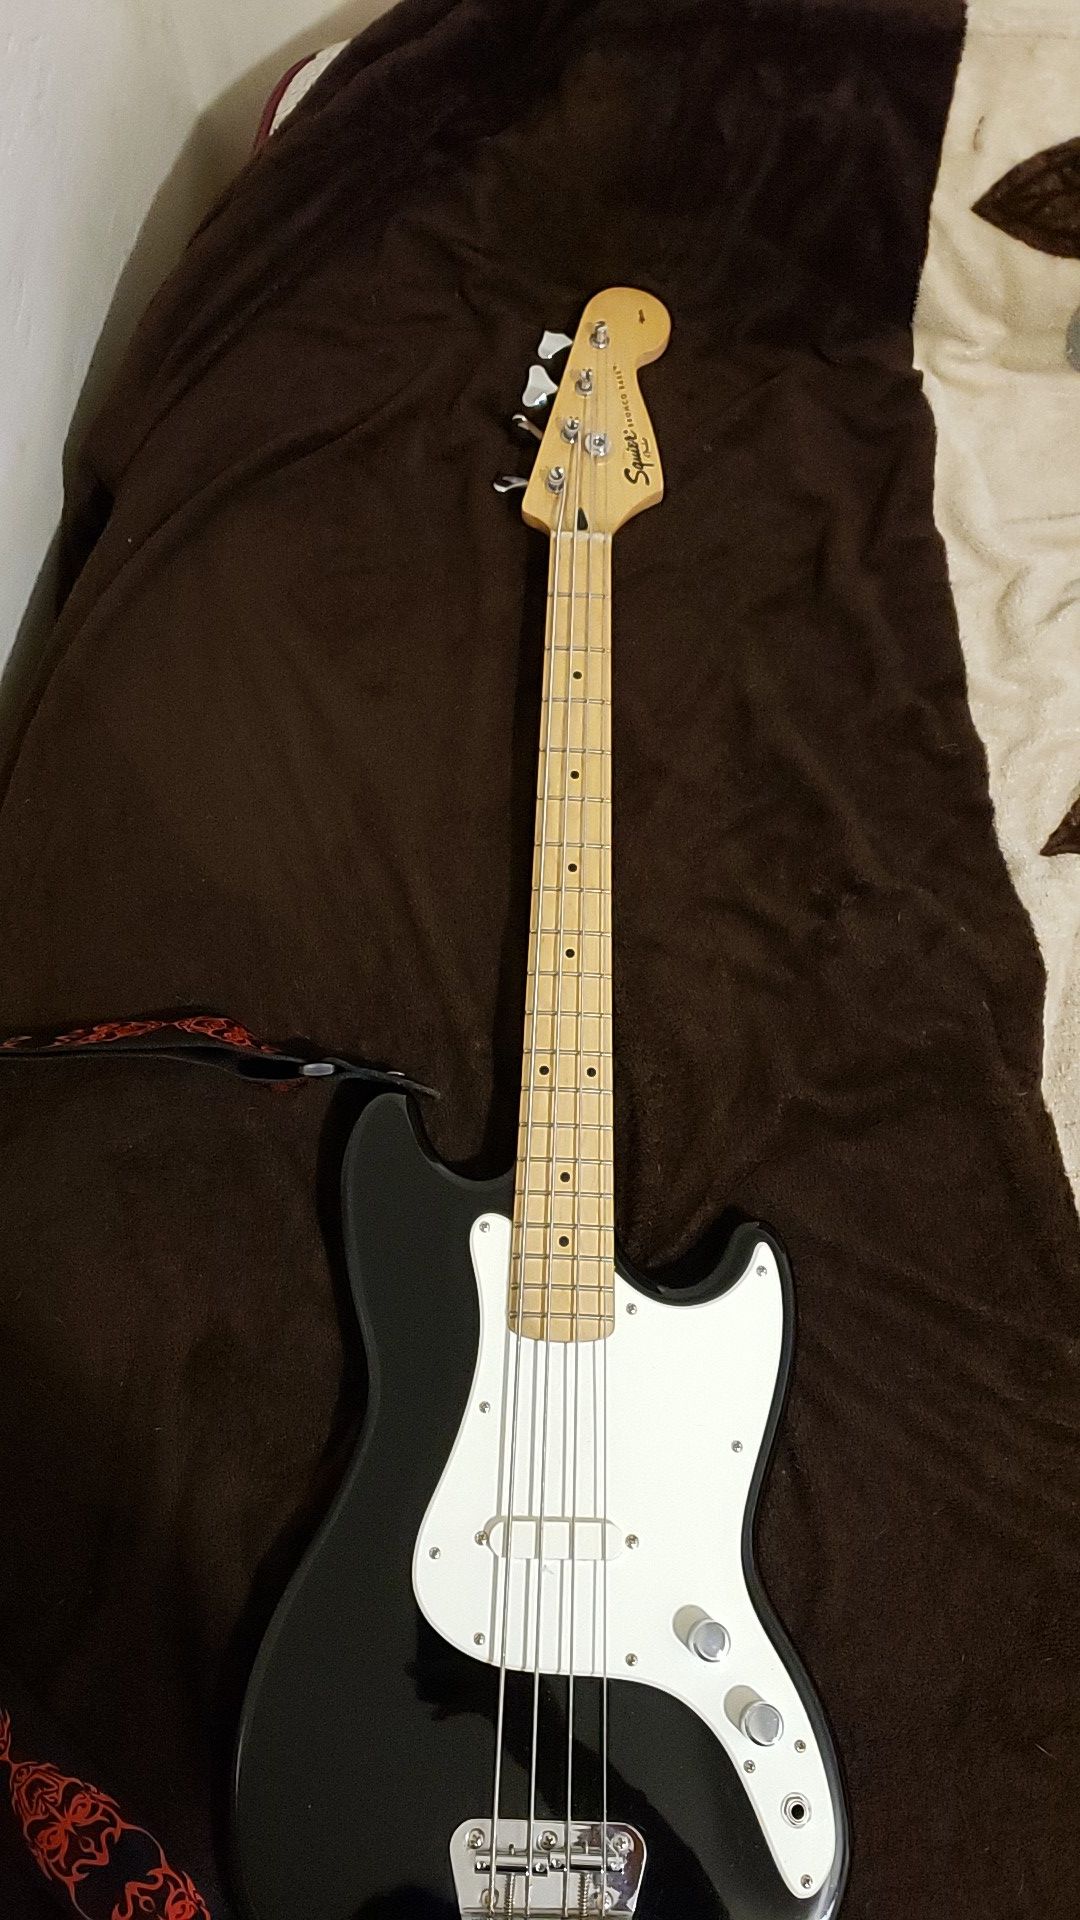 Bronco bass by Fender